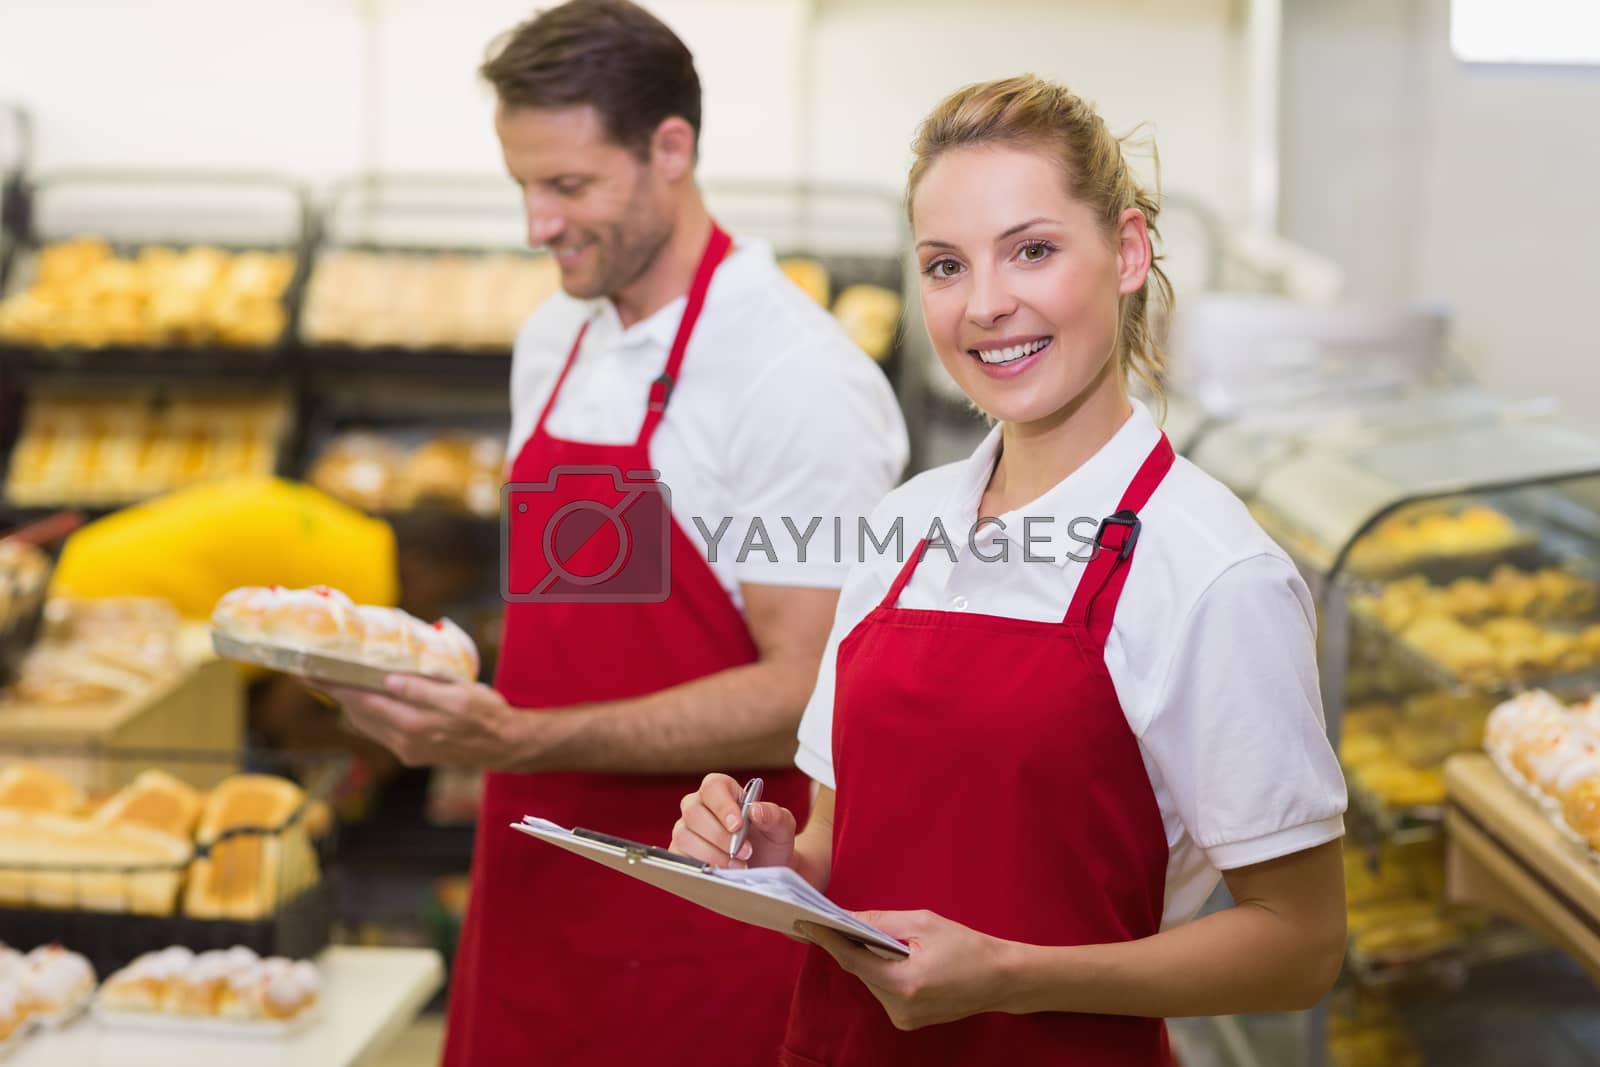 Royalty free image of Portrait of a smiling baker with her colleague by Wavebreakmedia